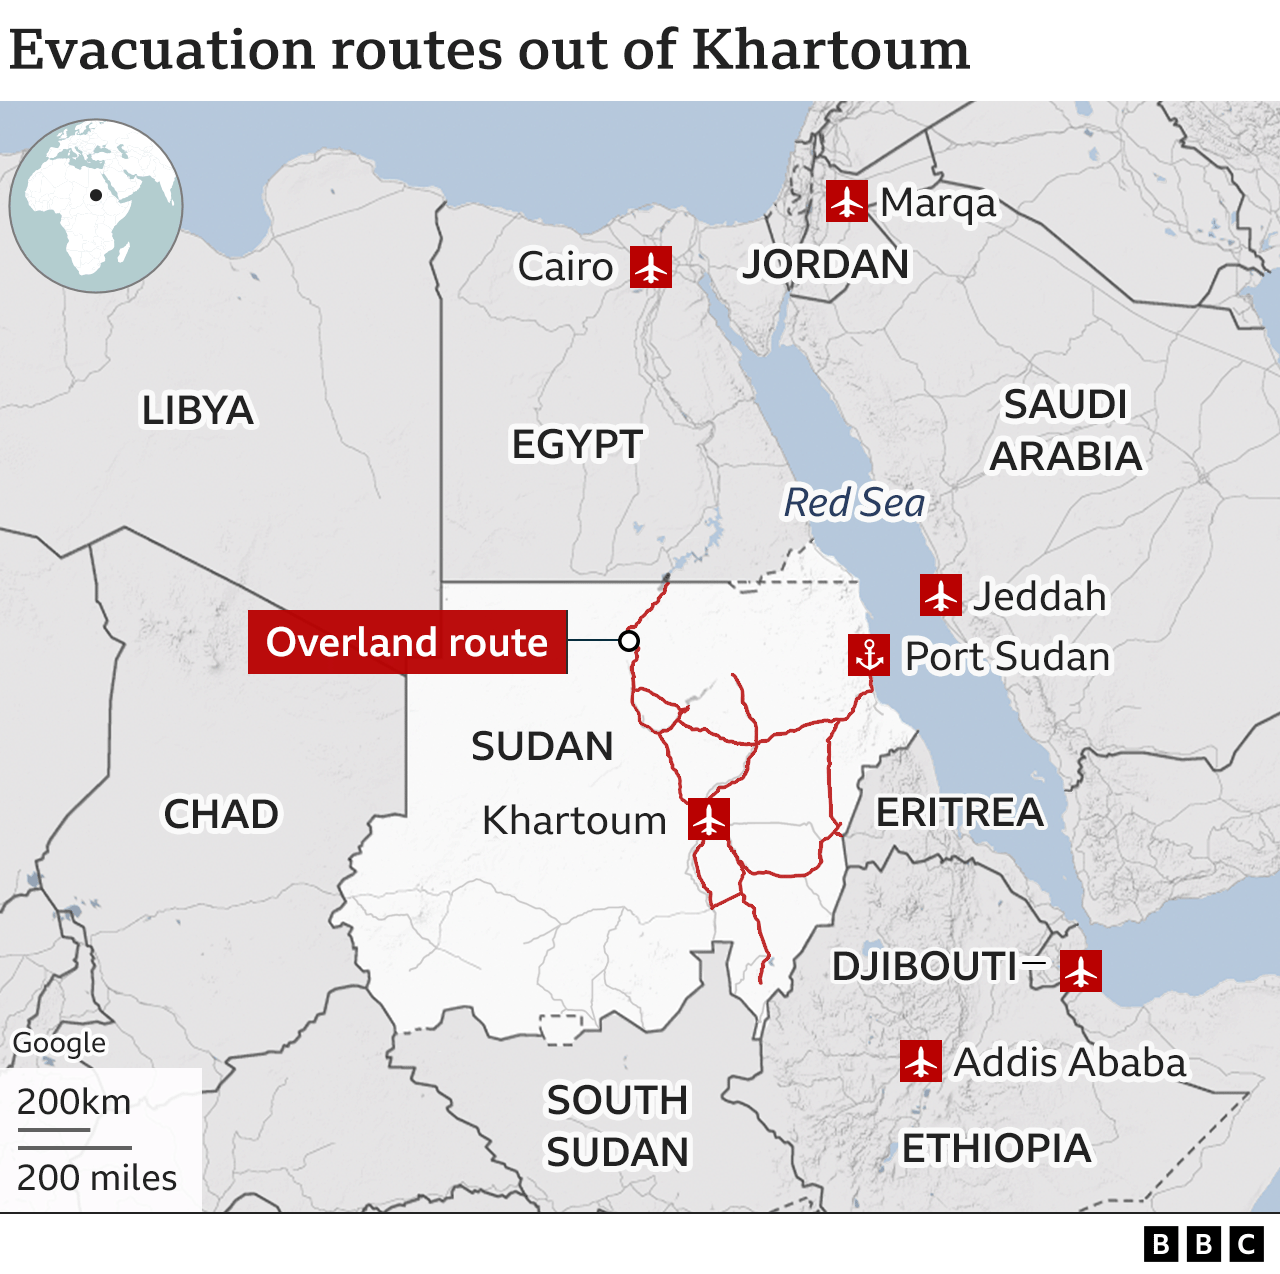 A map showing evacuation routes being followed across Sudan